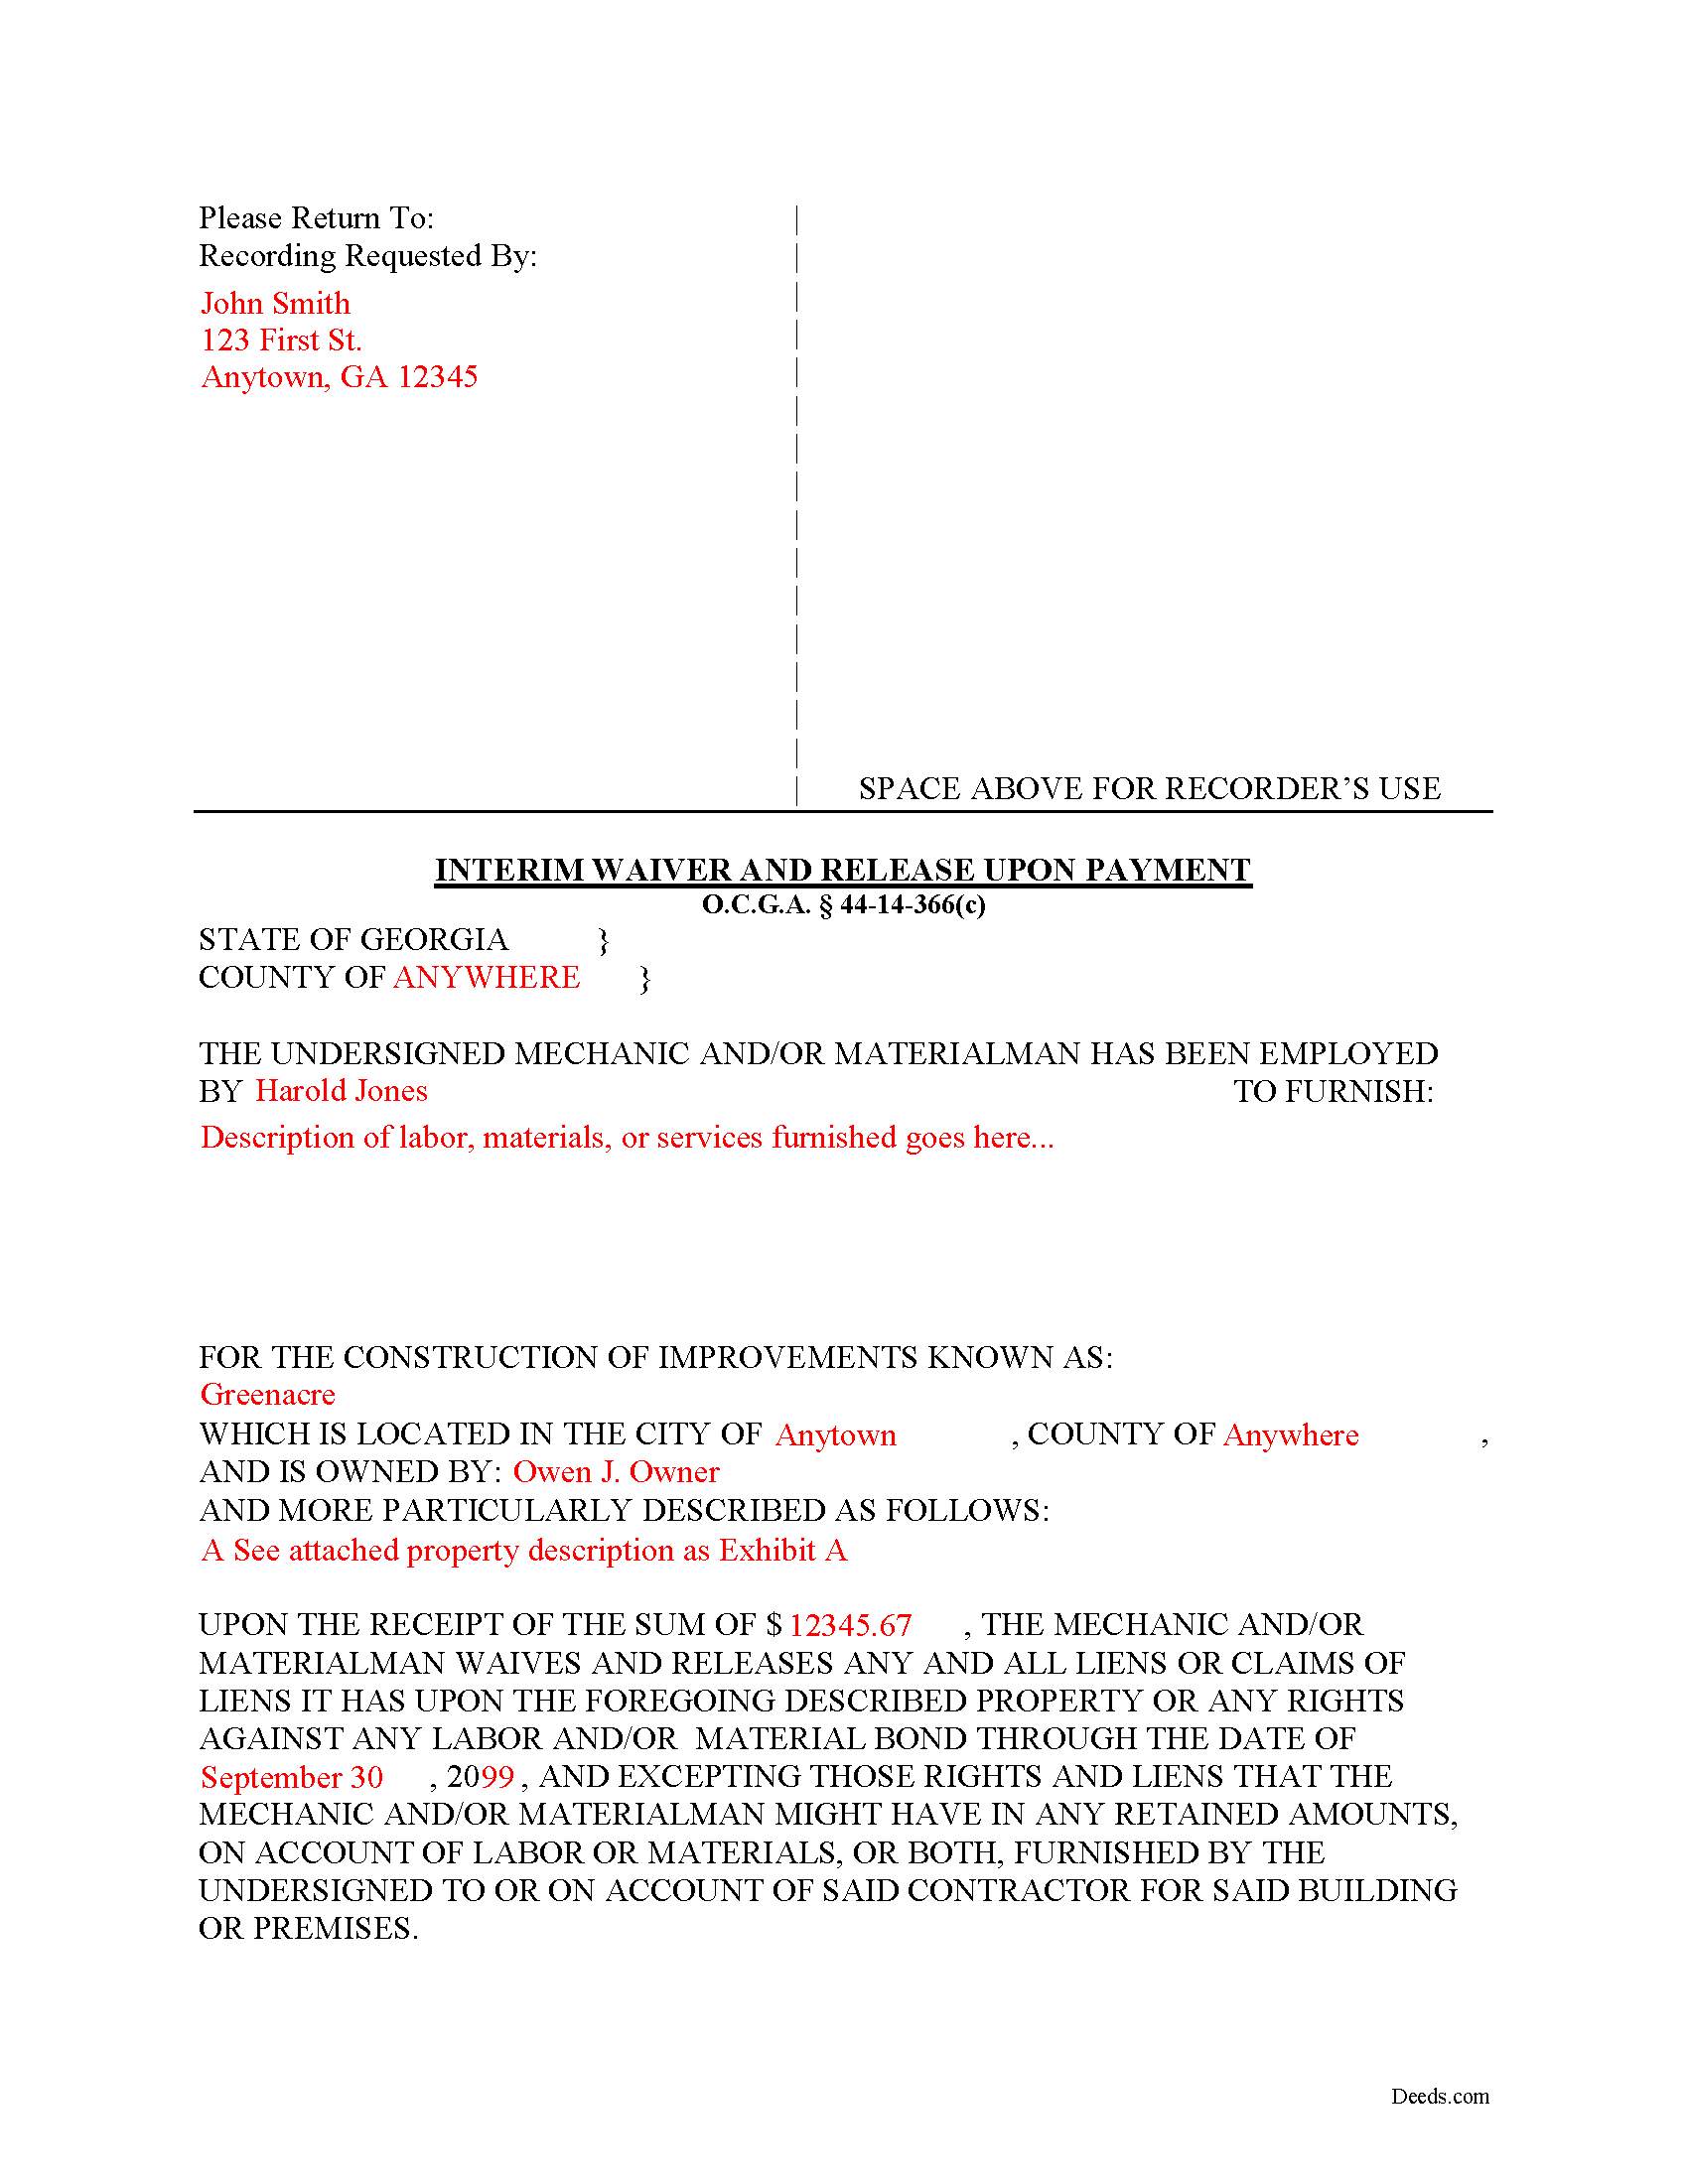 Completed Example of the Interim Lien Waiver and Release Document